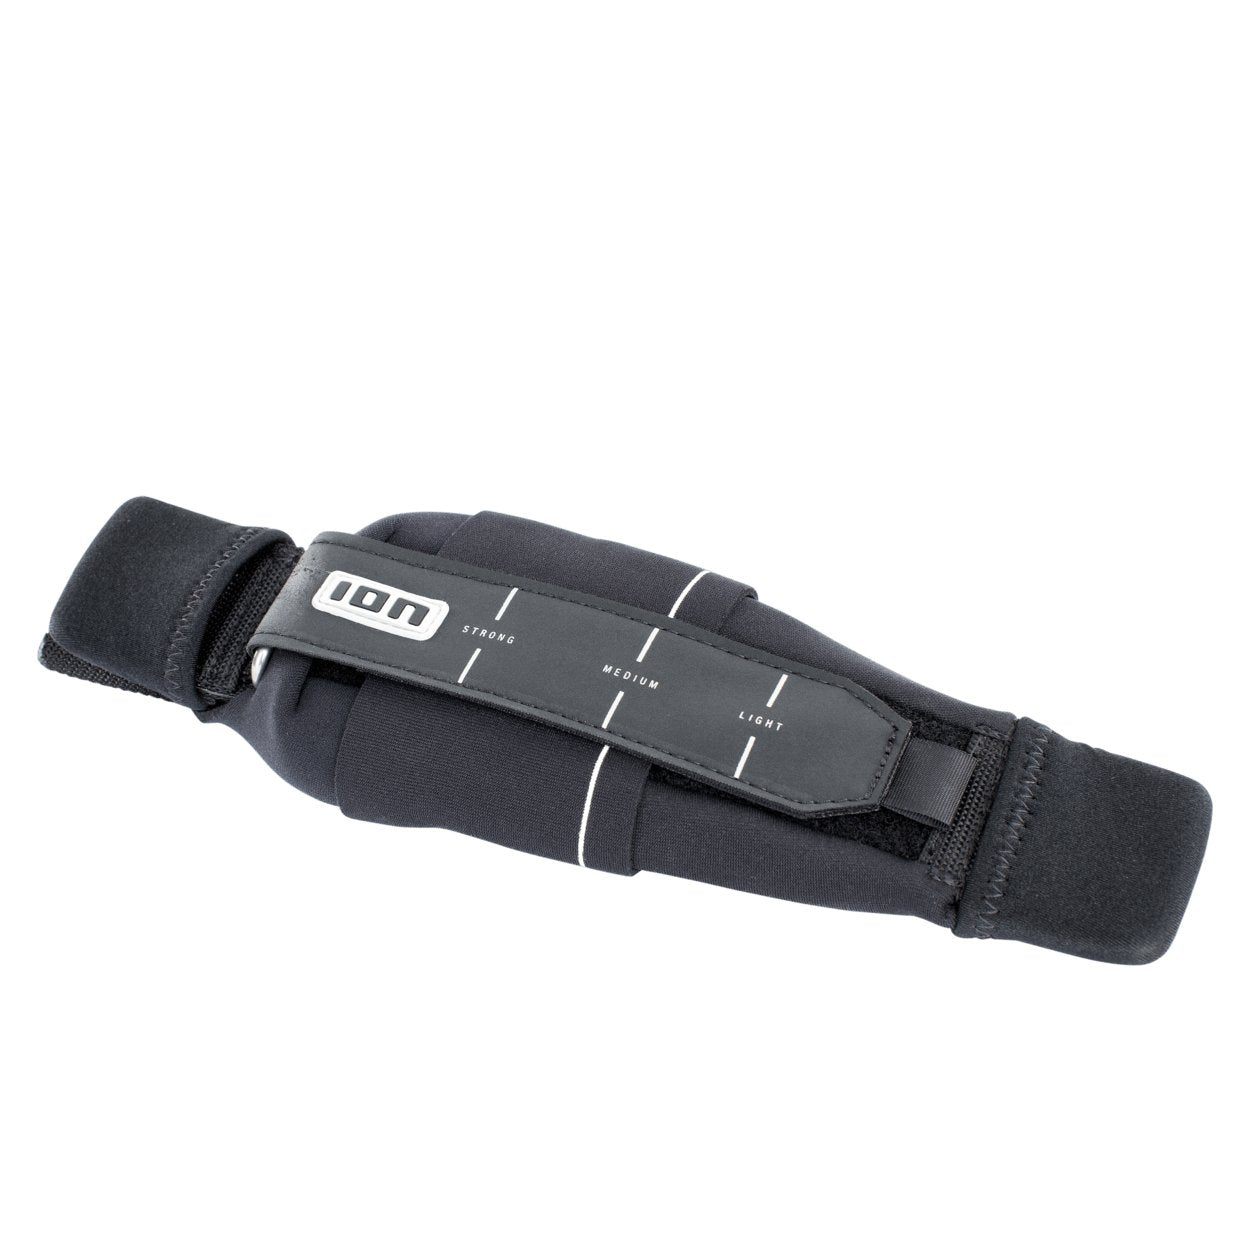 ION Safety Footstrap 2022 - Worthing Watersports - 9008415965656 - Accessories - ION Water